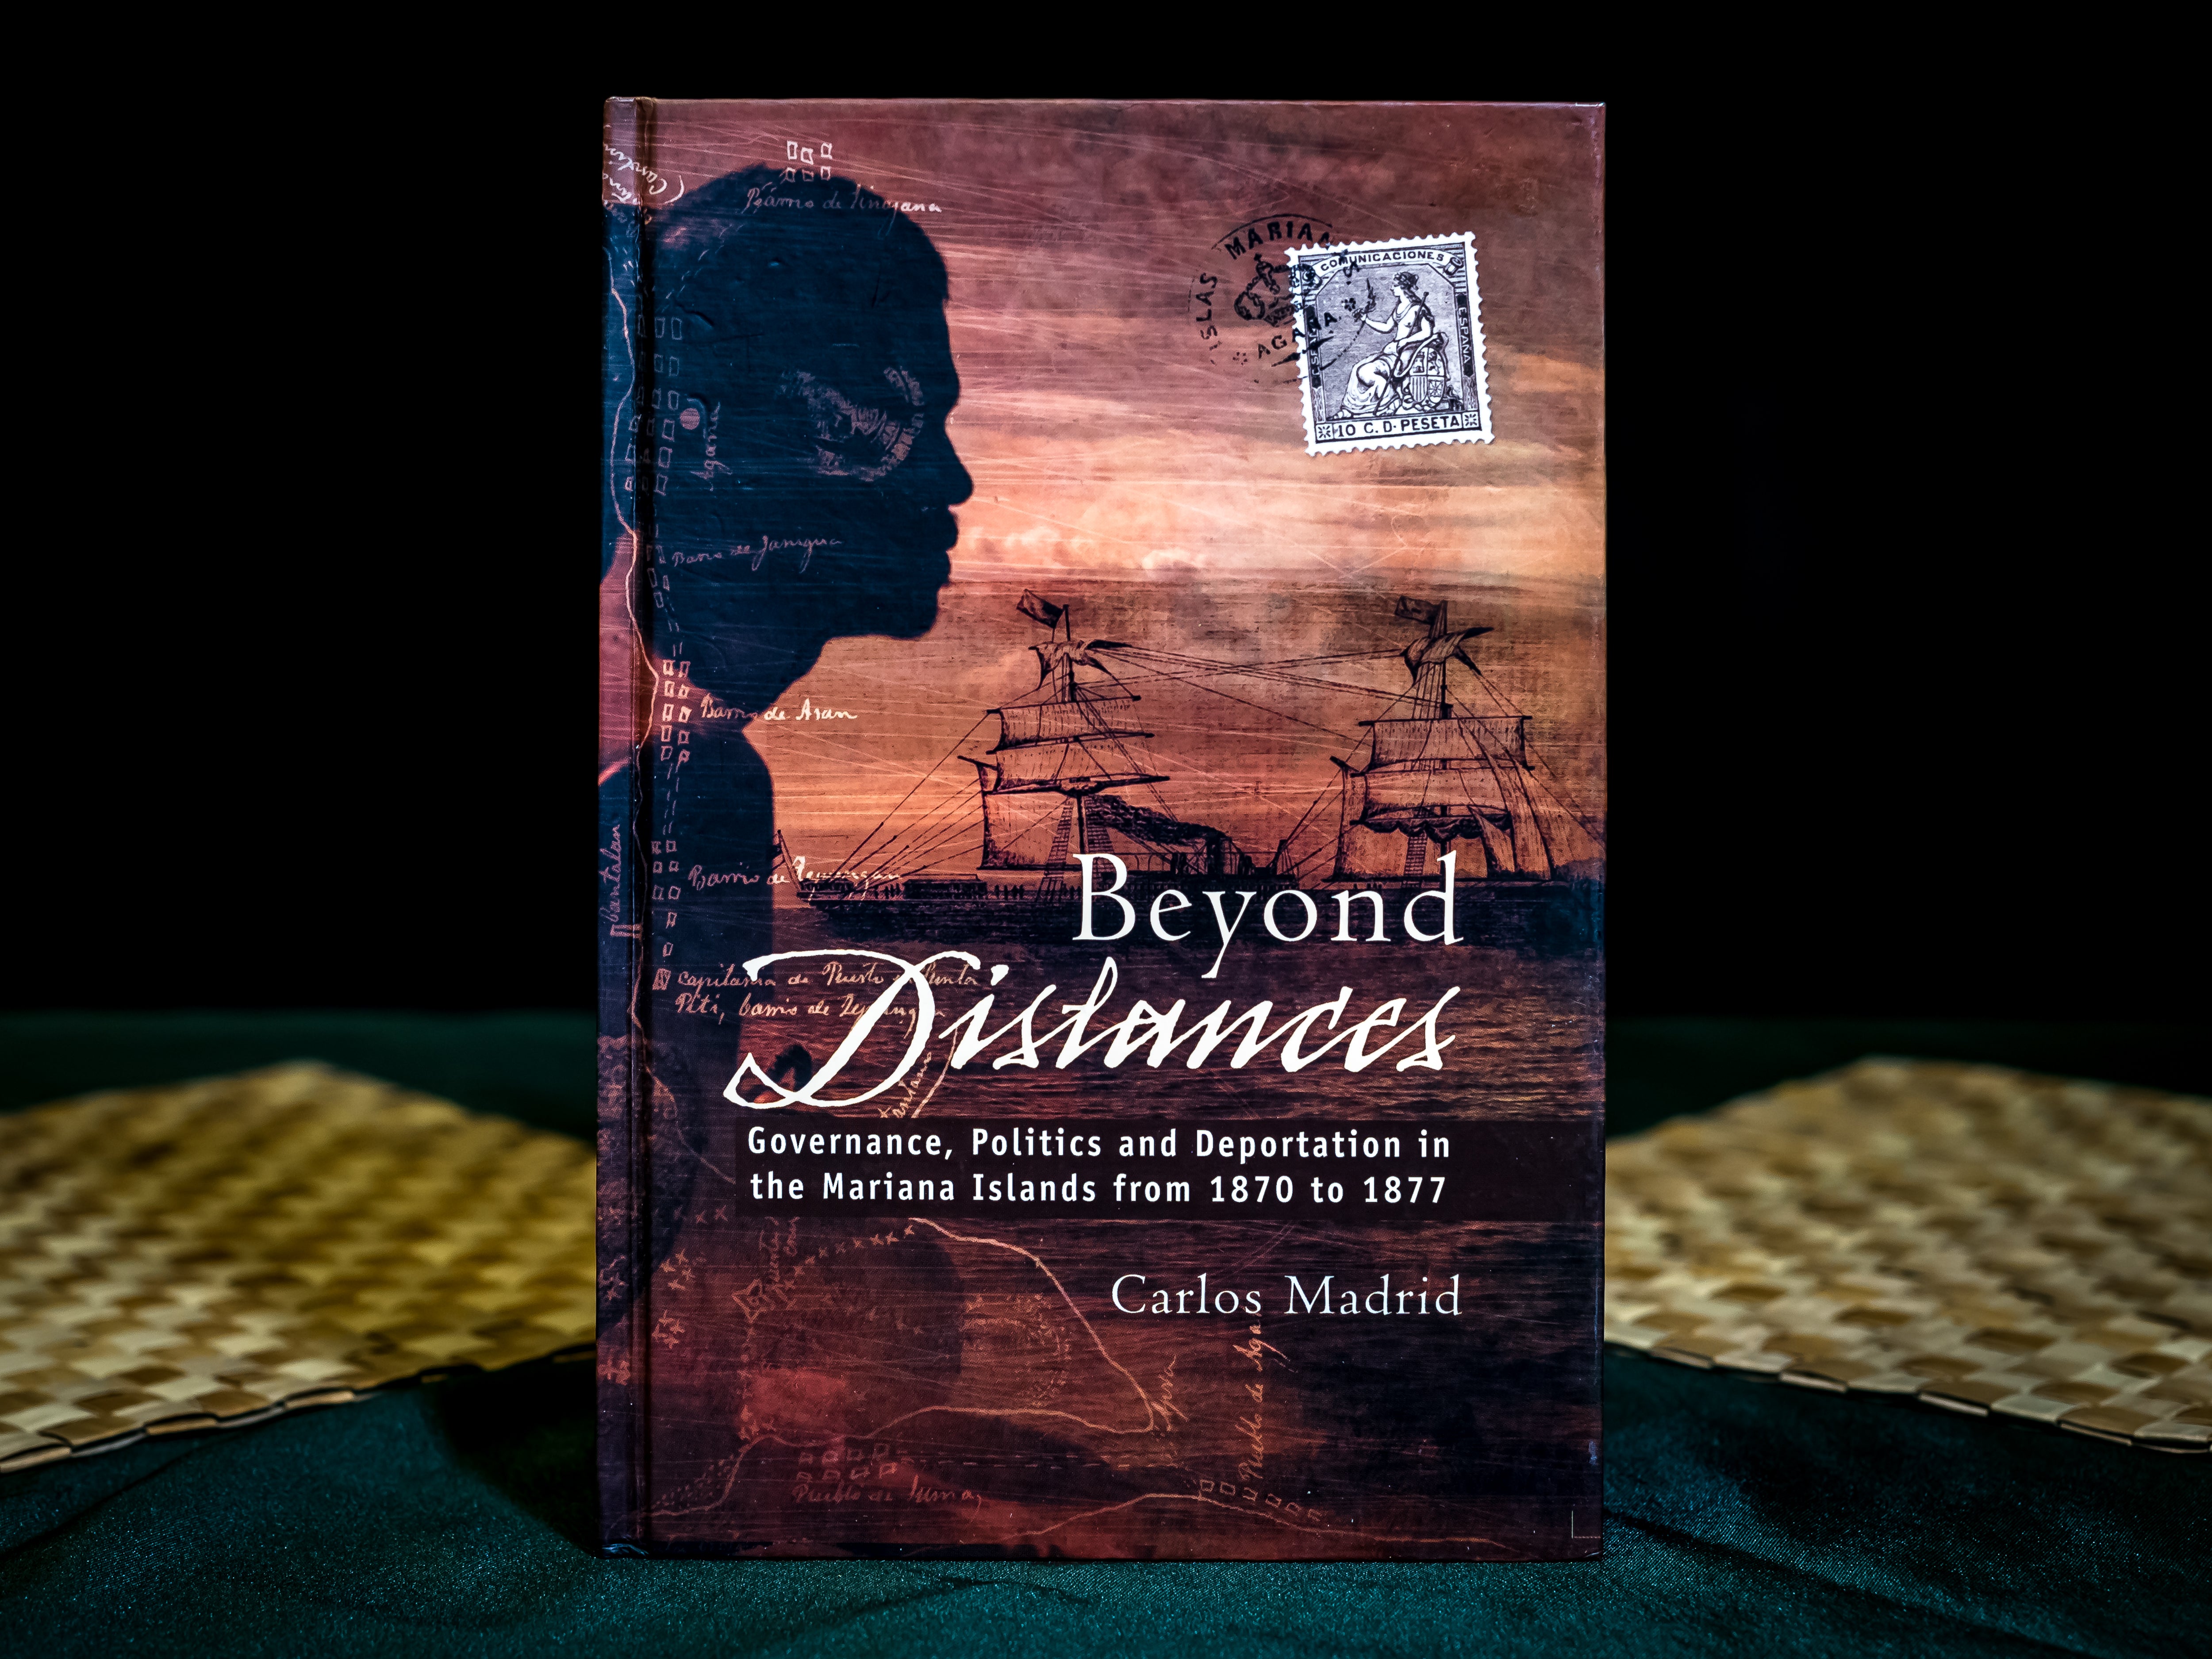 Beyond Distances: Governance, Politics and Deportation in the Mariana Islands from 1870 to 1877